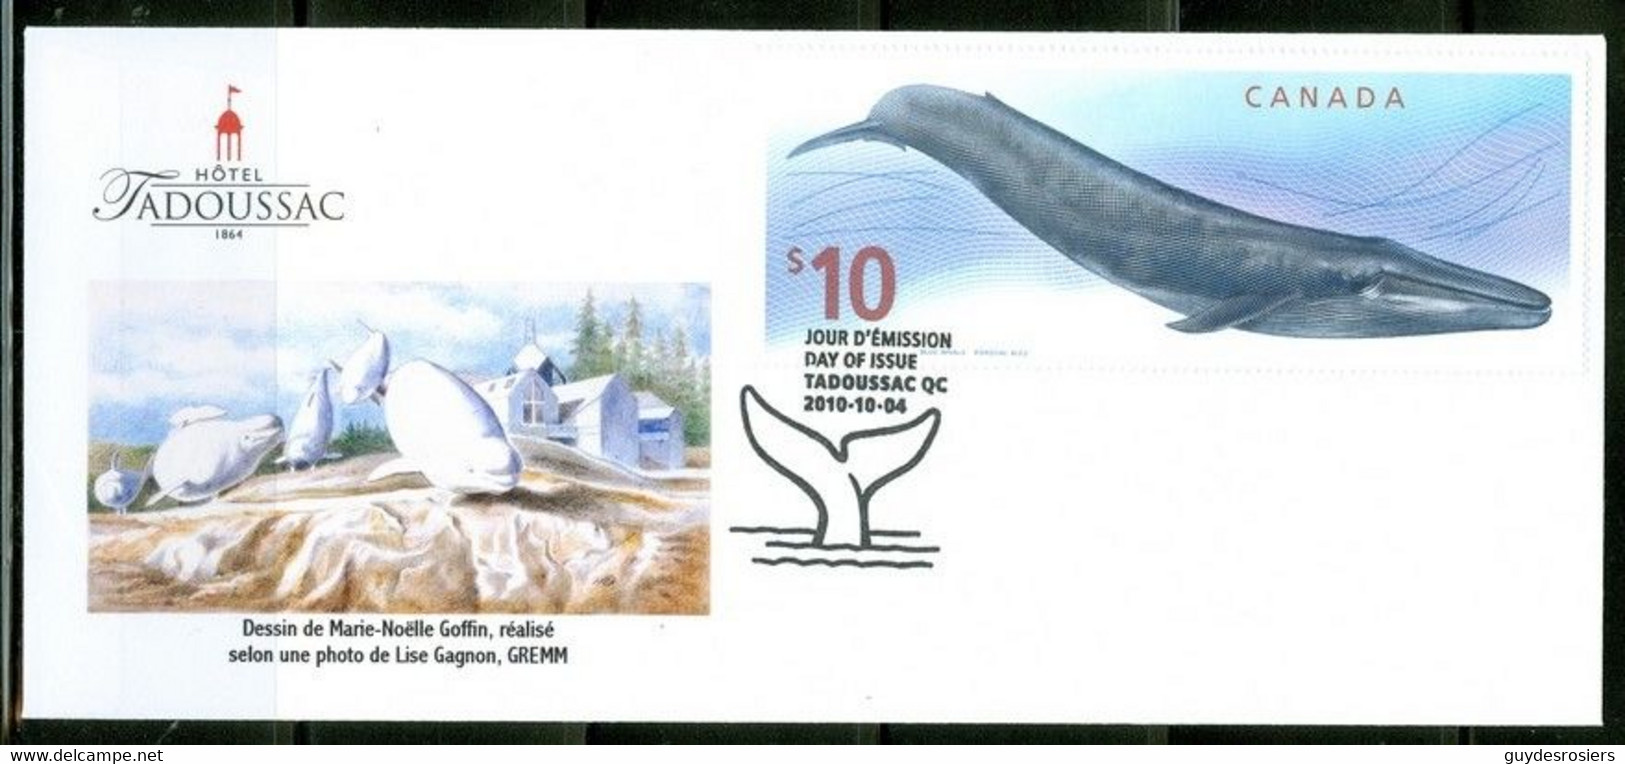 Baleine / Whale; Marie-N. Goffin; Hôtel Tadoussac; Timbre Scott # 2405 Stamp; PPJ / FDC (0338) - Covers & Documents